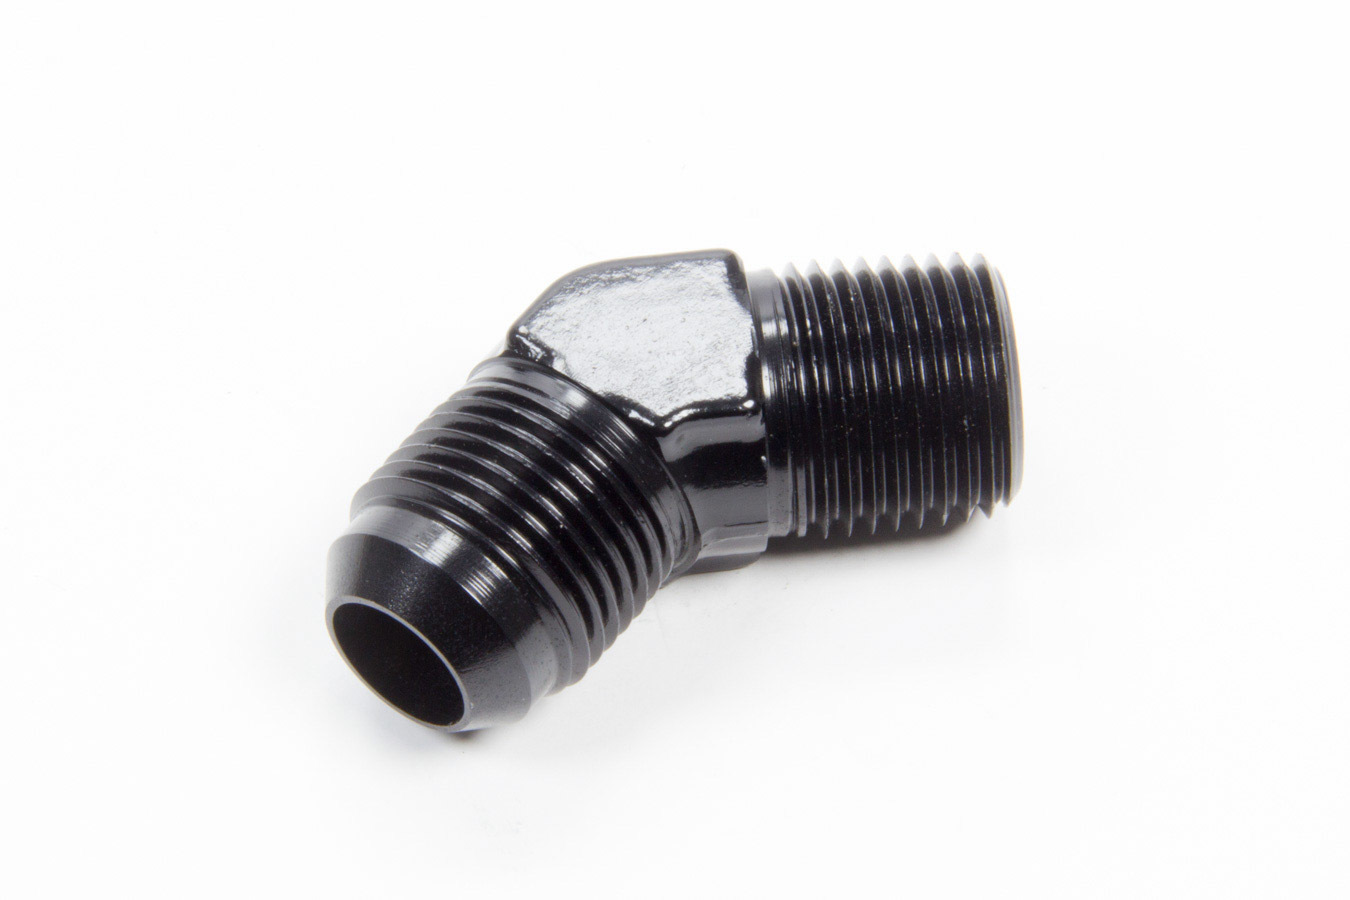 Aeroquip FCM5024 Fitting, Adapter, 45 Degree, 10 AN Male to 1/2 in NPT Male, Aluminum, Black Anodized, Each